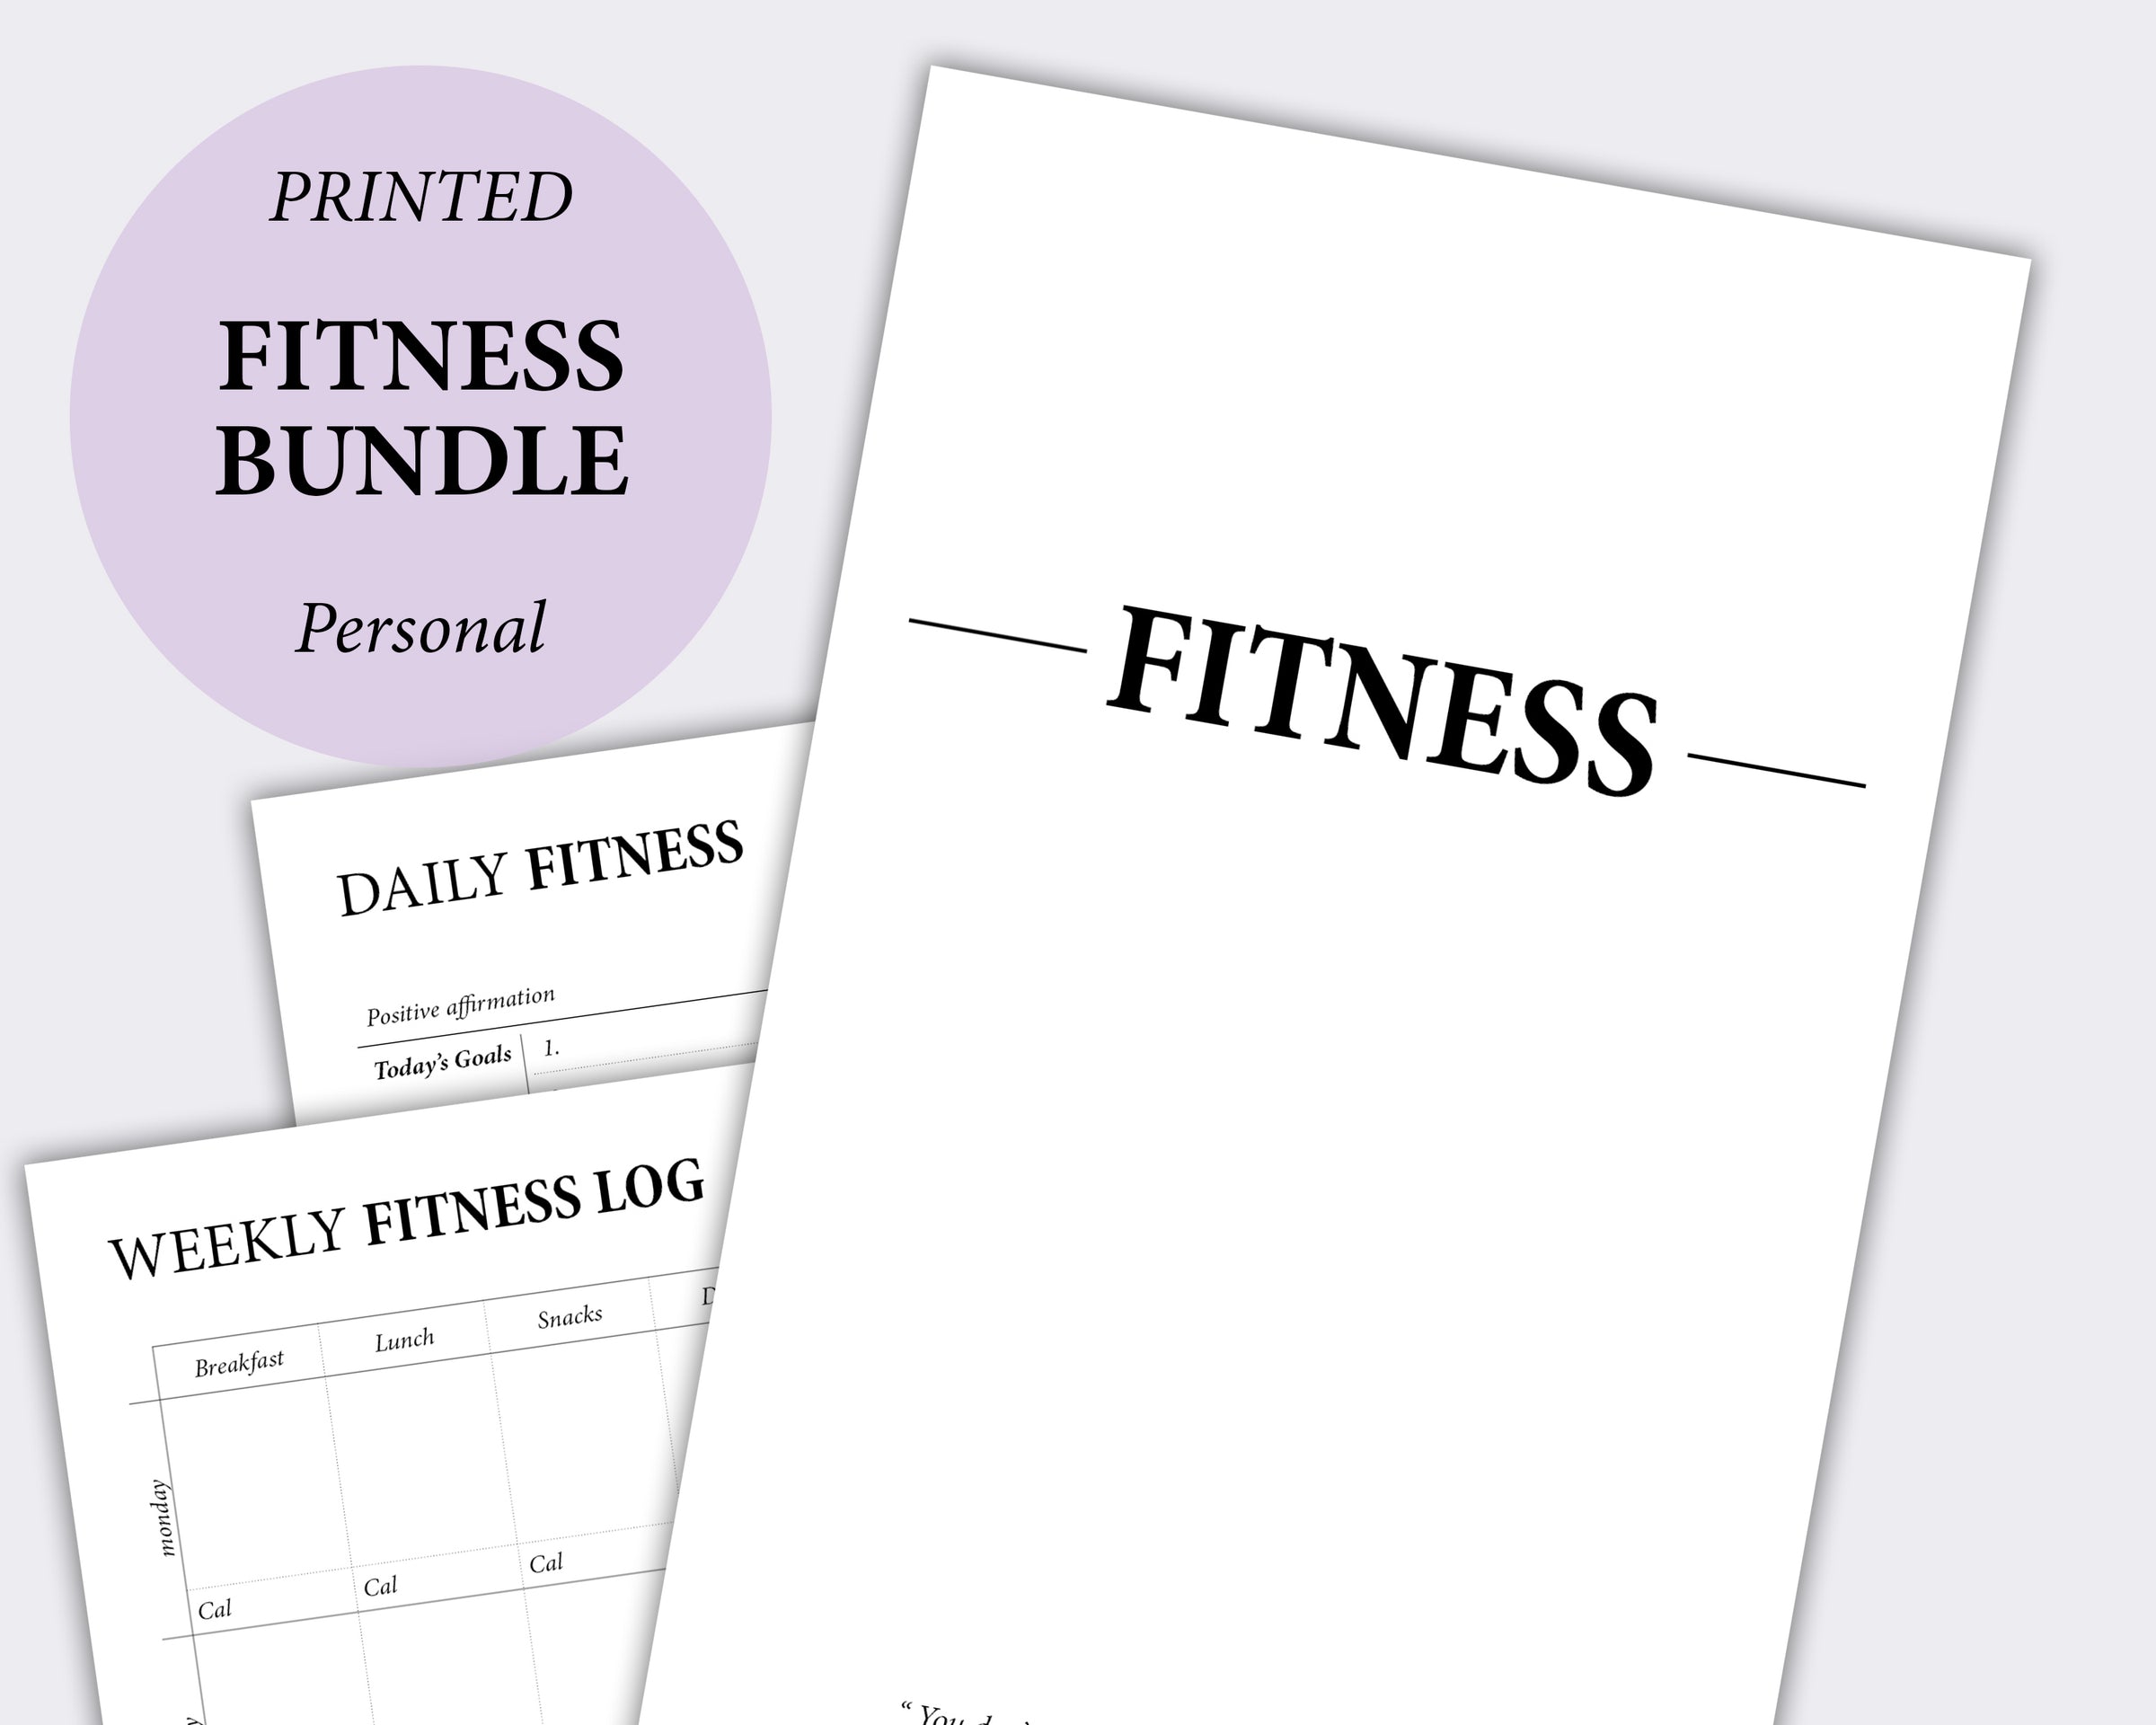 Fitness Bundle - Personal